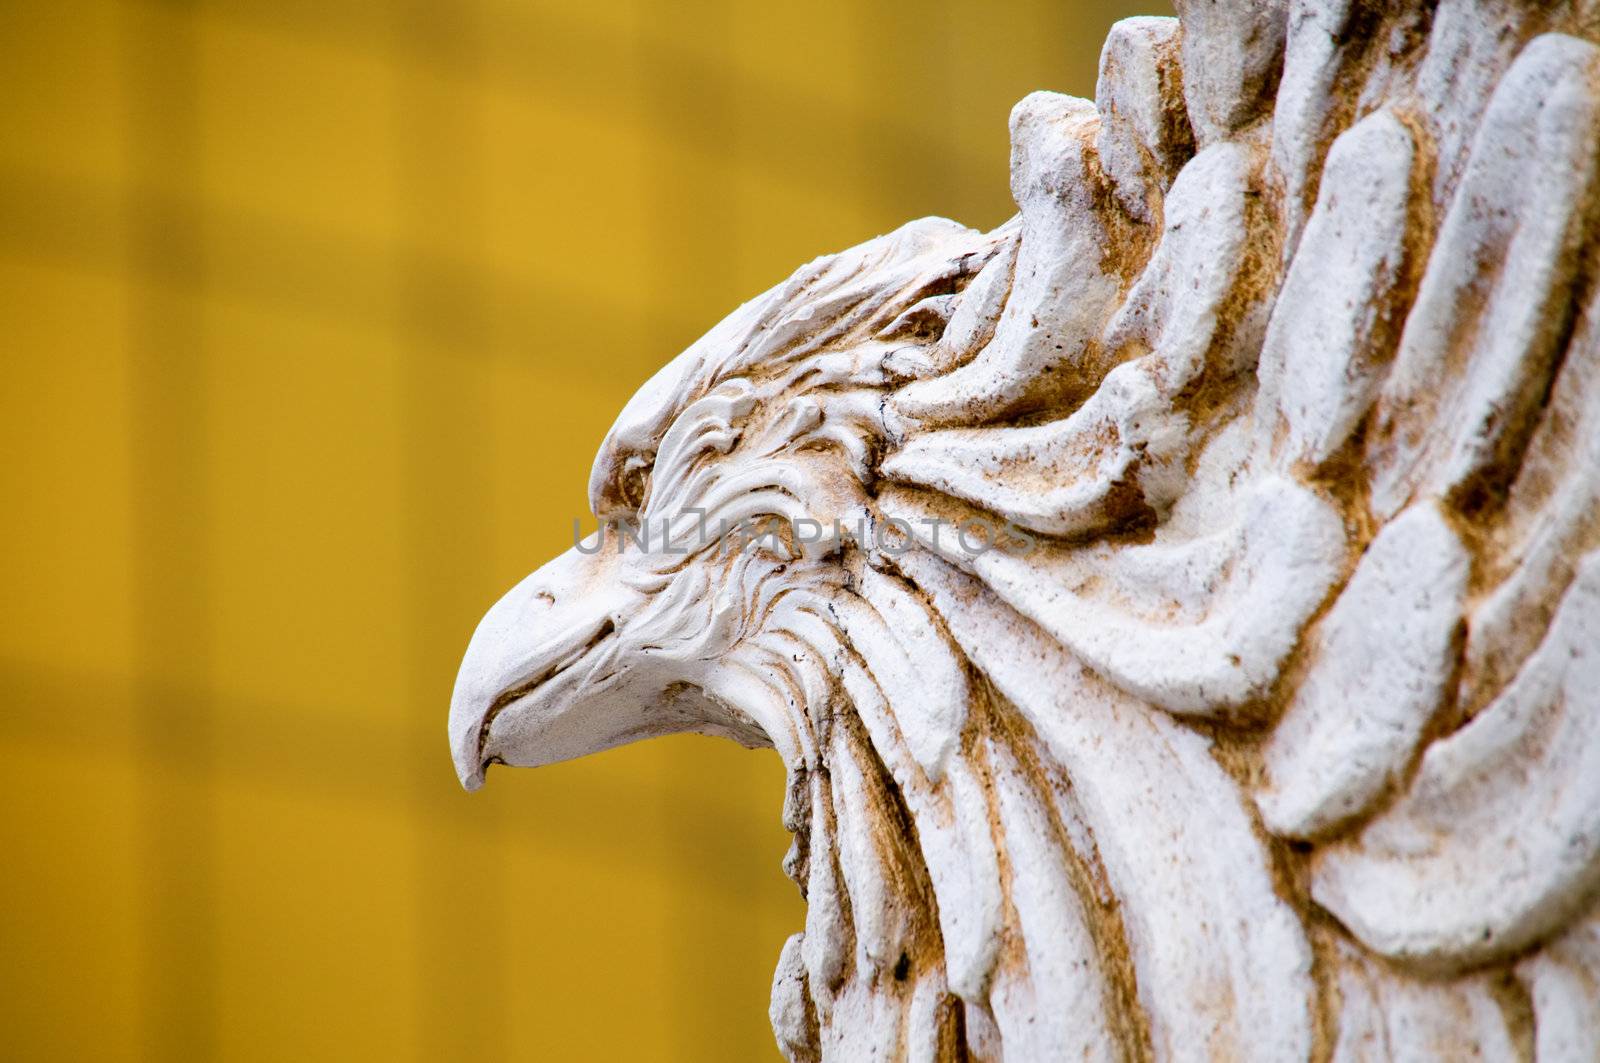 The detail of the eagle staturay head